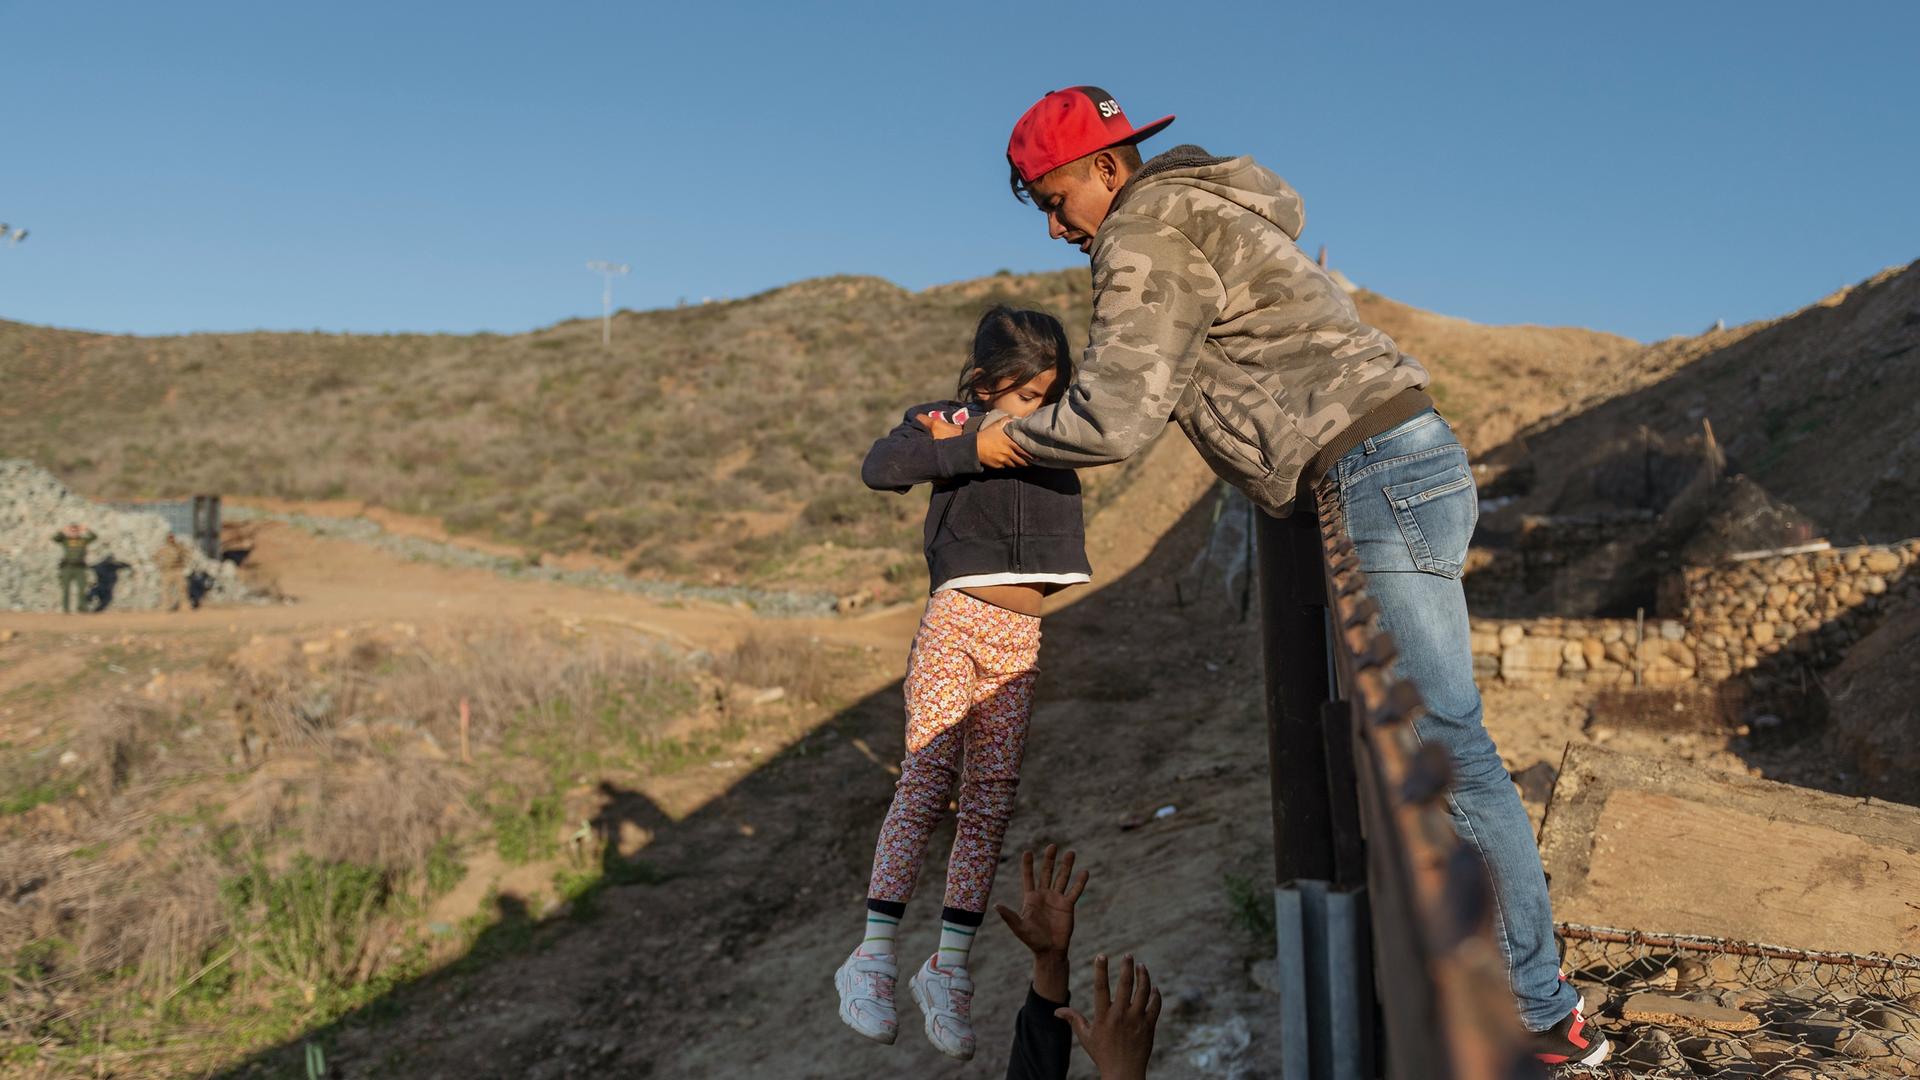 A child is passed over a border wall to the arms of a man wearing jeans, a red cap and tan sweatshirt. 